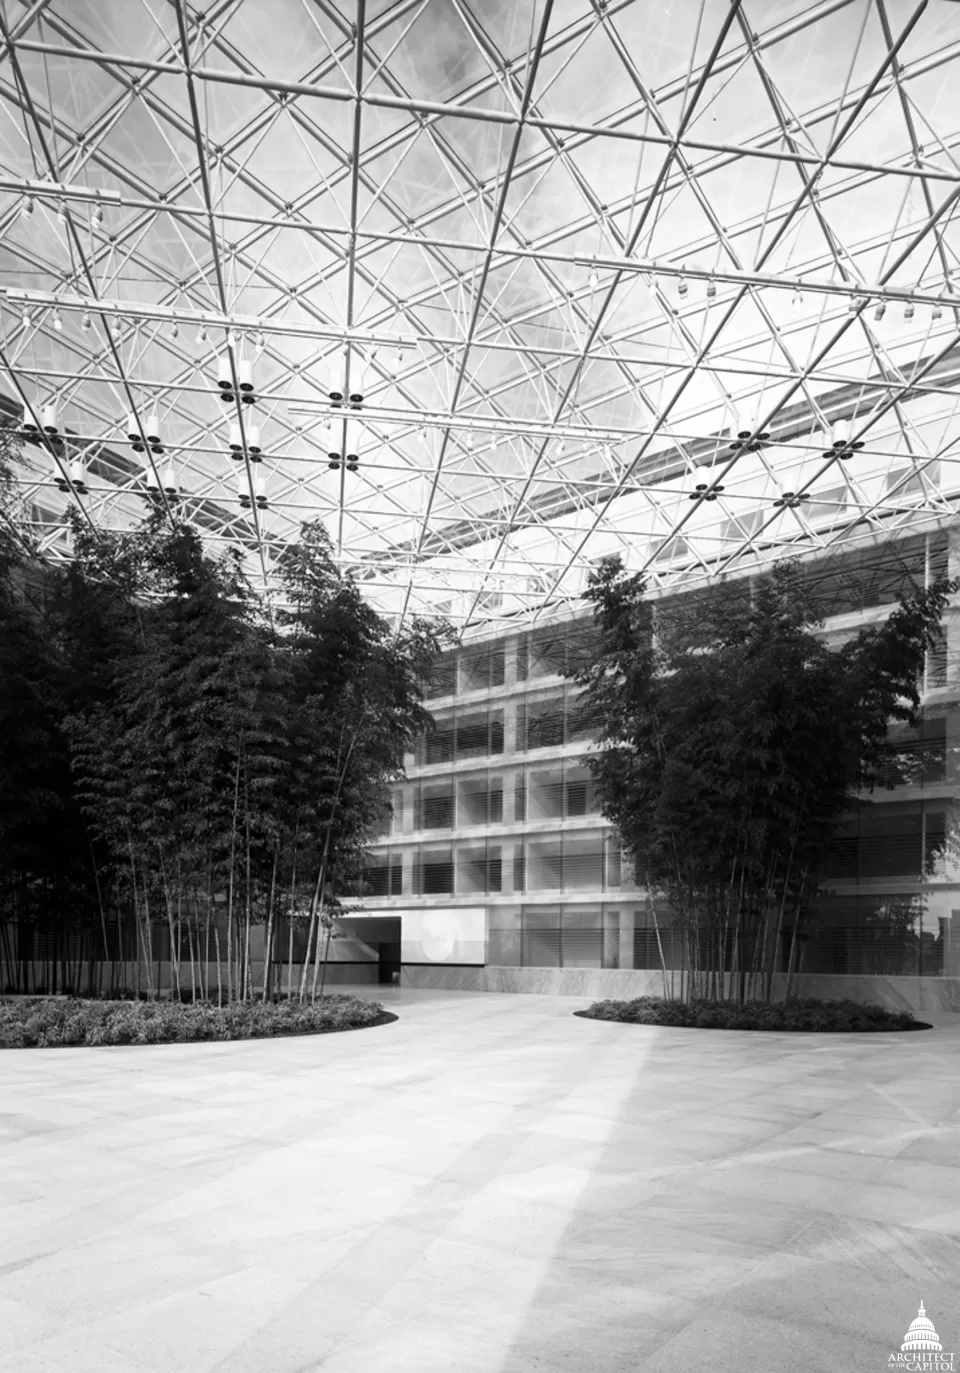 Interior view of the Thurgood Marshall Building's atrium and bamboo planters.